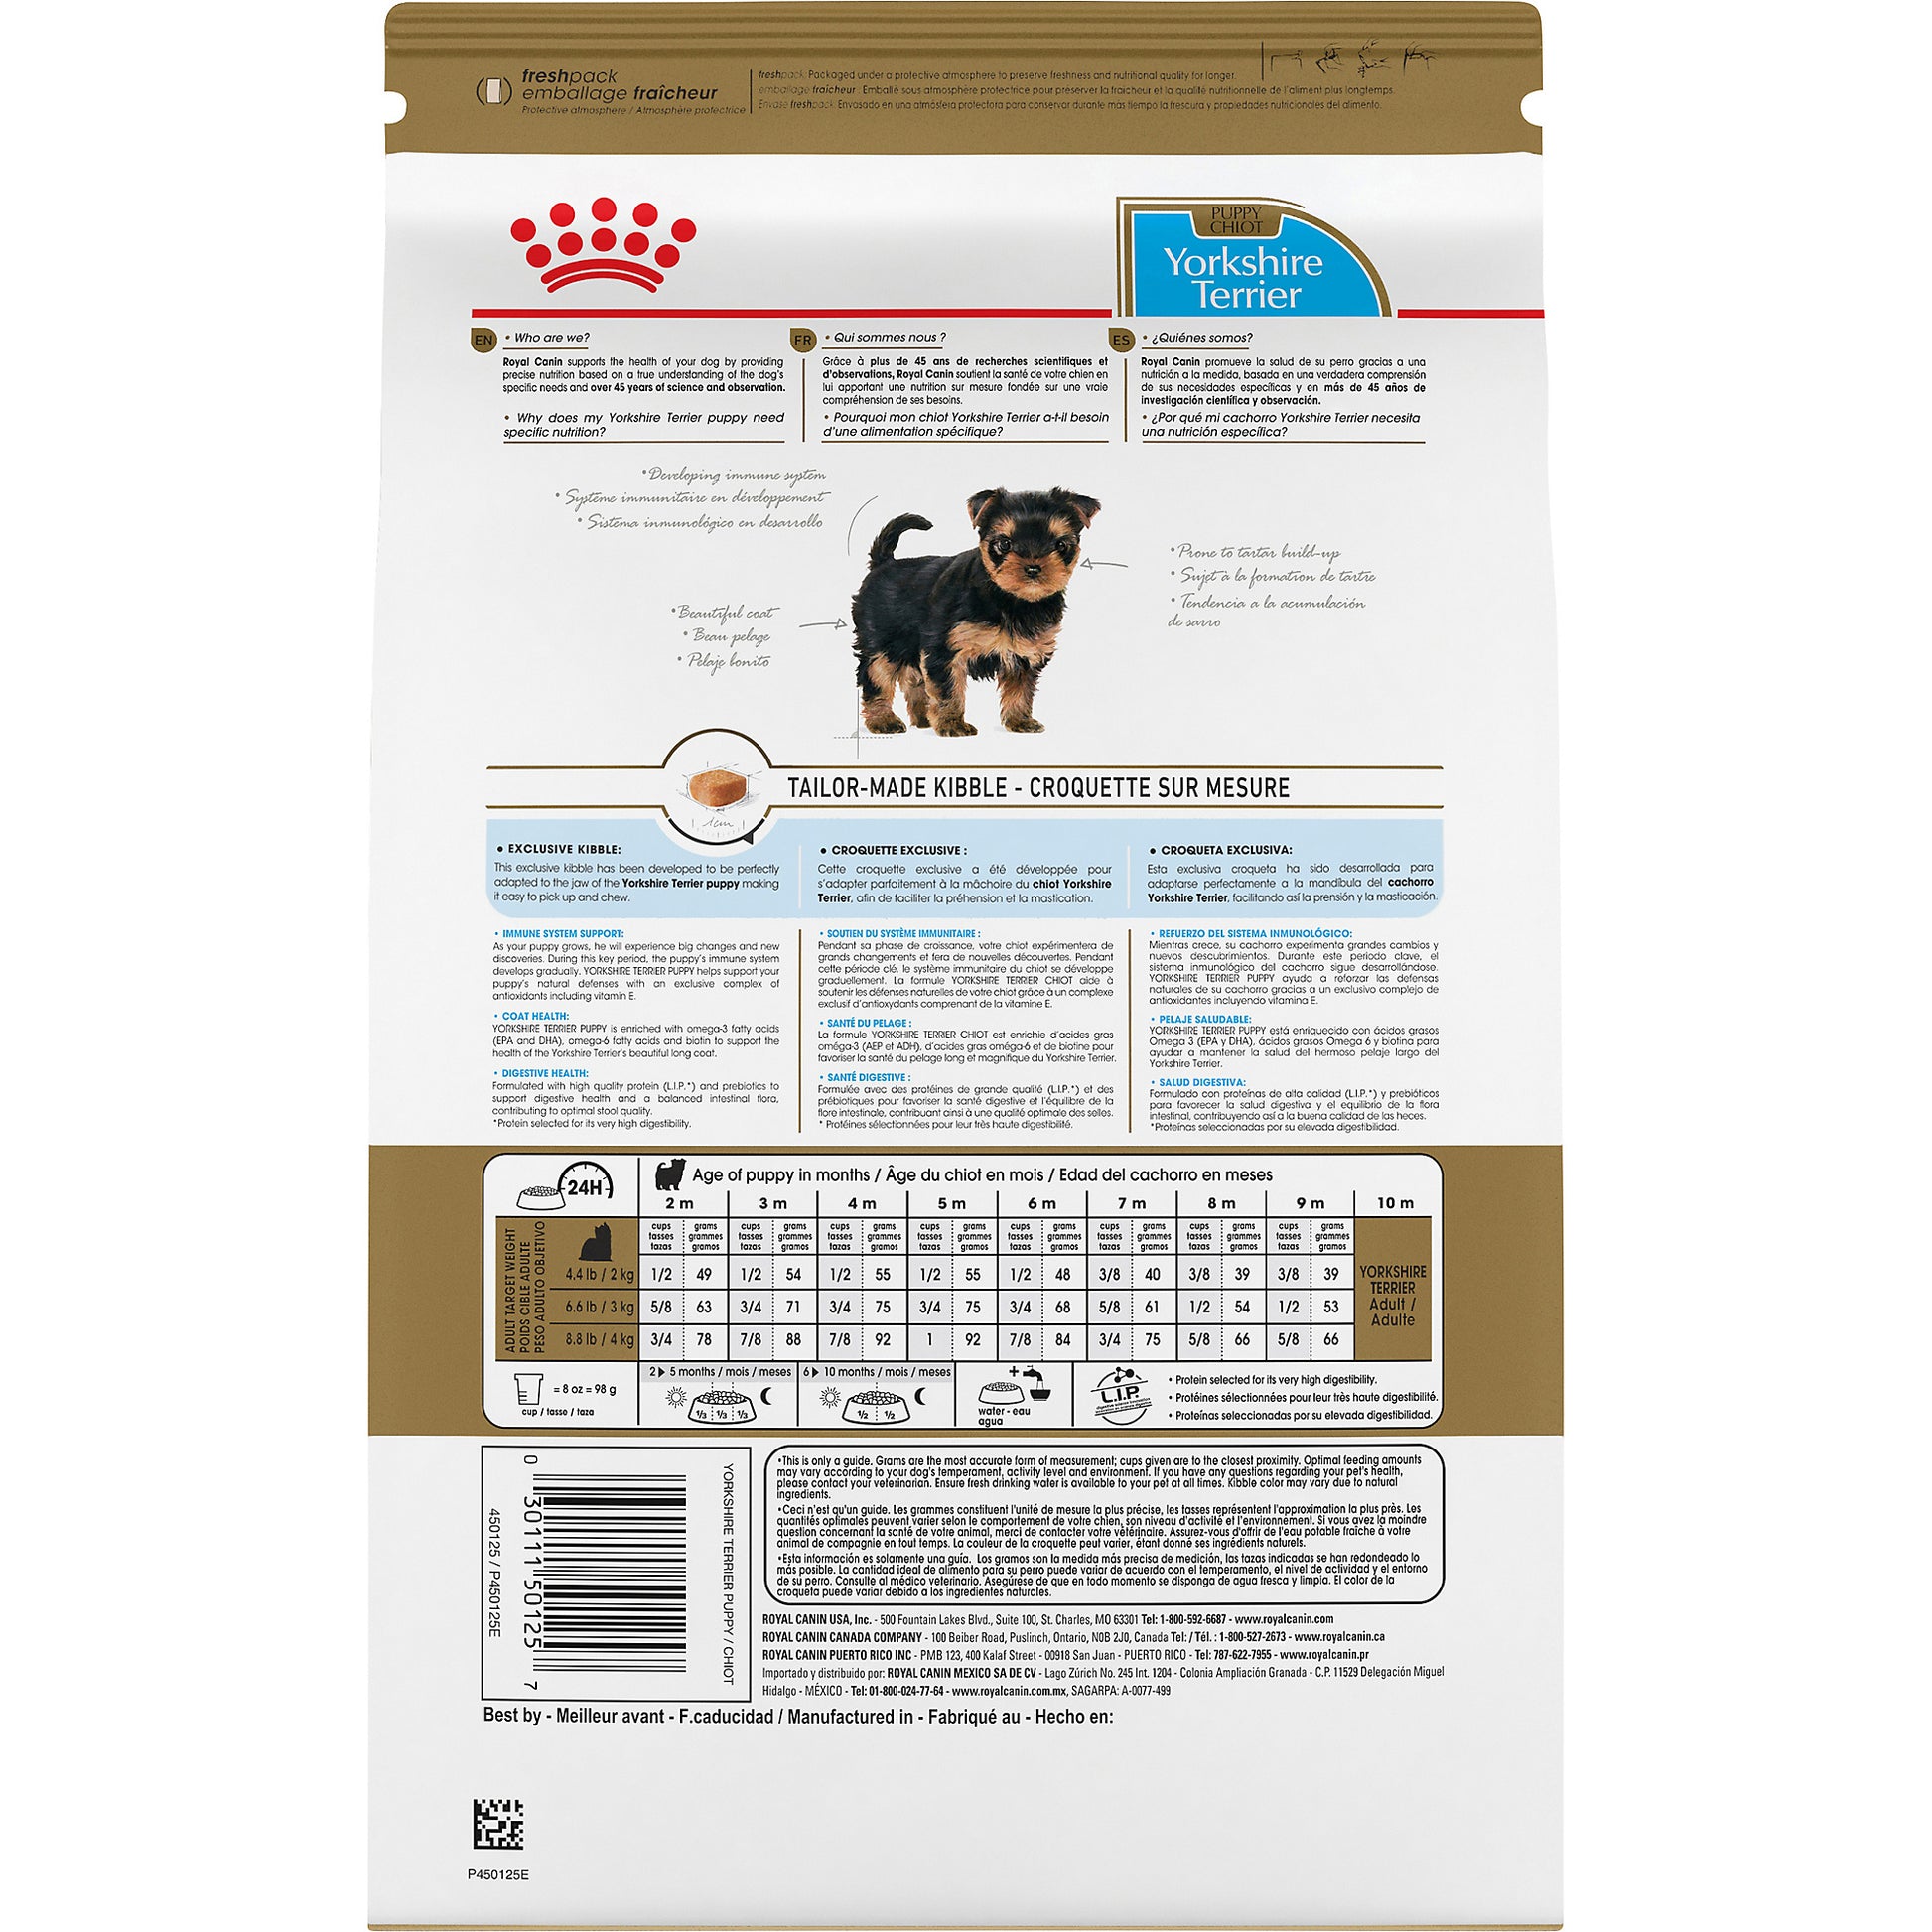 Royal Canin Yorkshire Terrier Puppy Food  Dog Food  | PetMax Canada